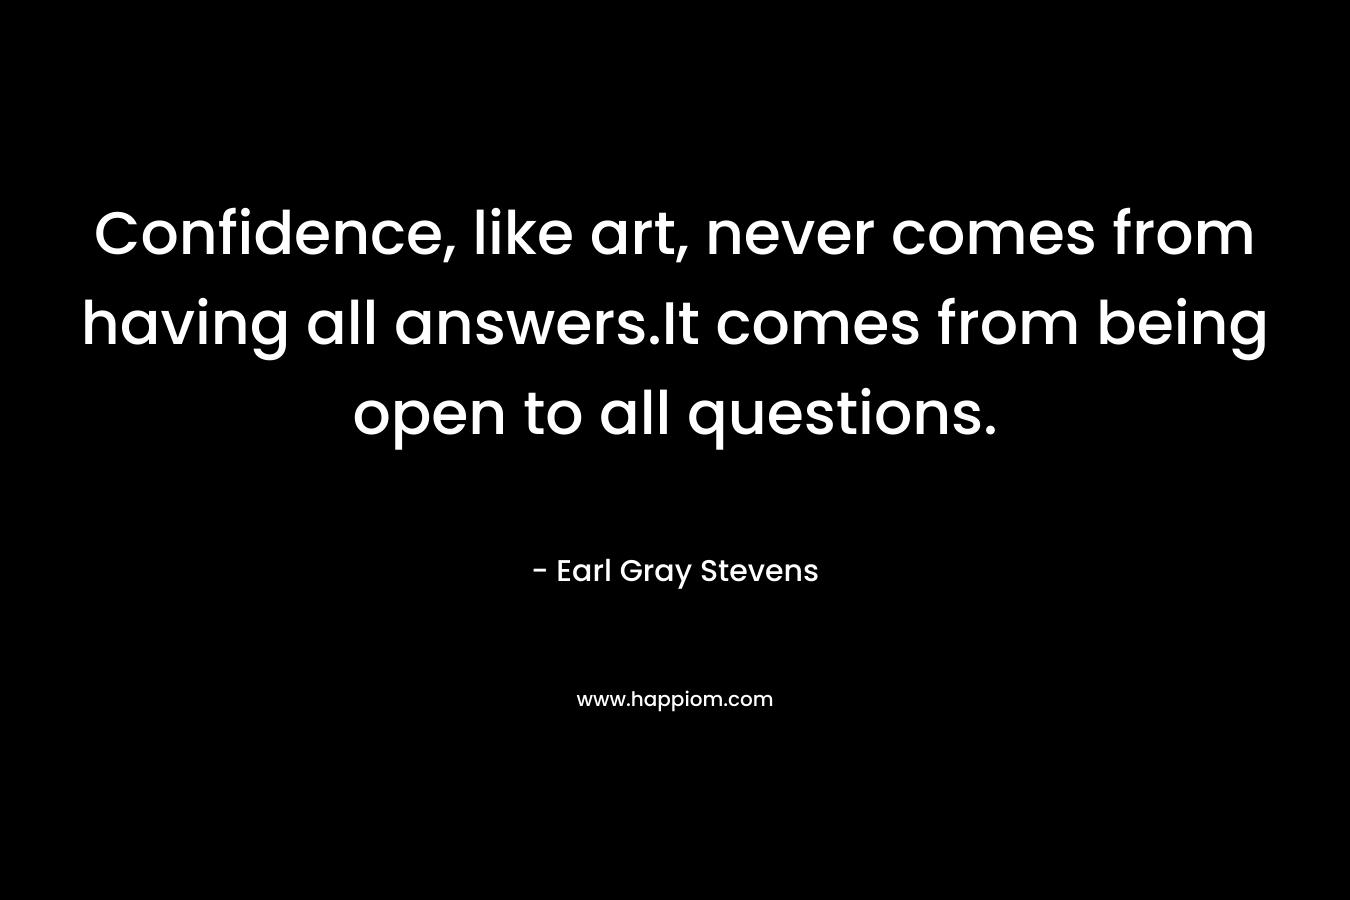 Confidence, like art, never comes from having all answers.It comes from being open to all questions. – Earl Gray Stevens